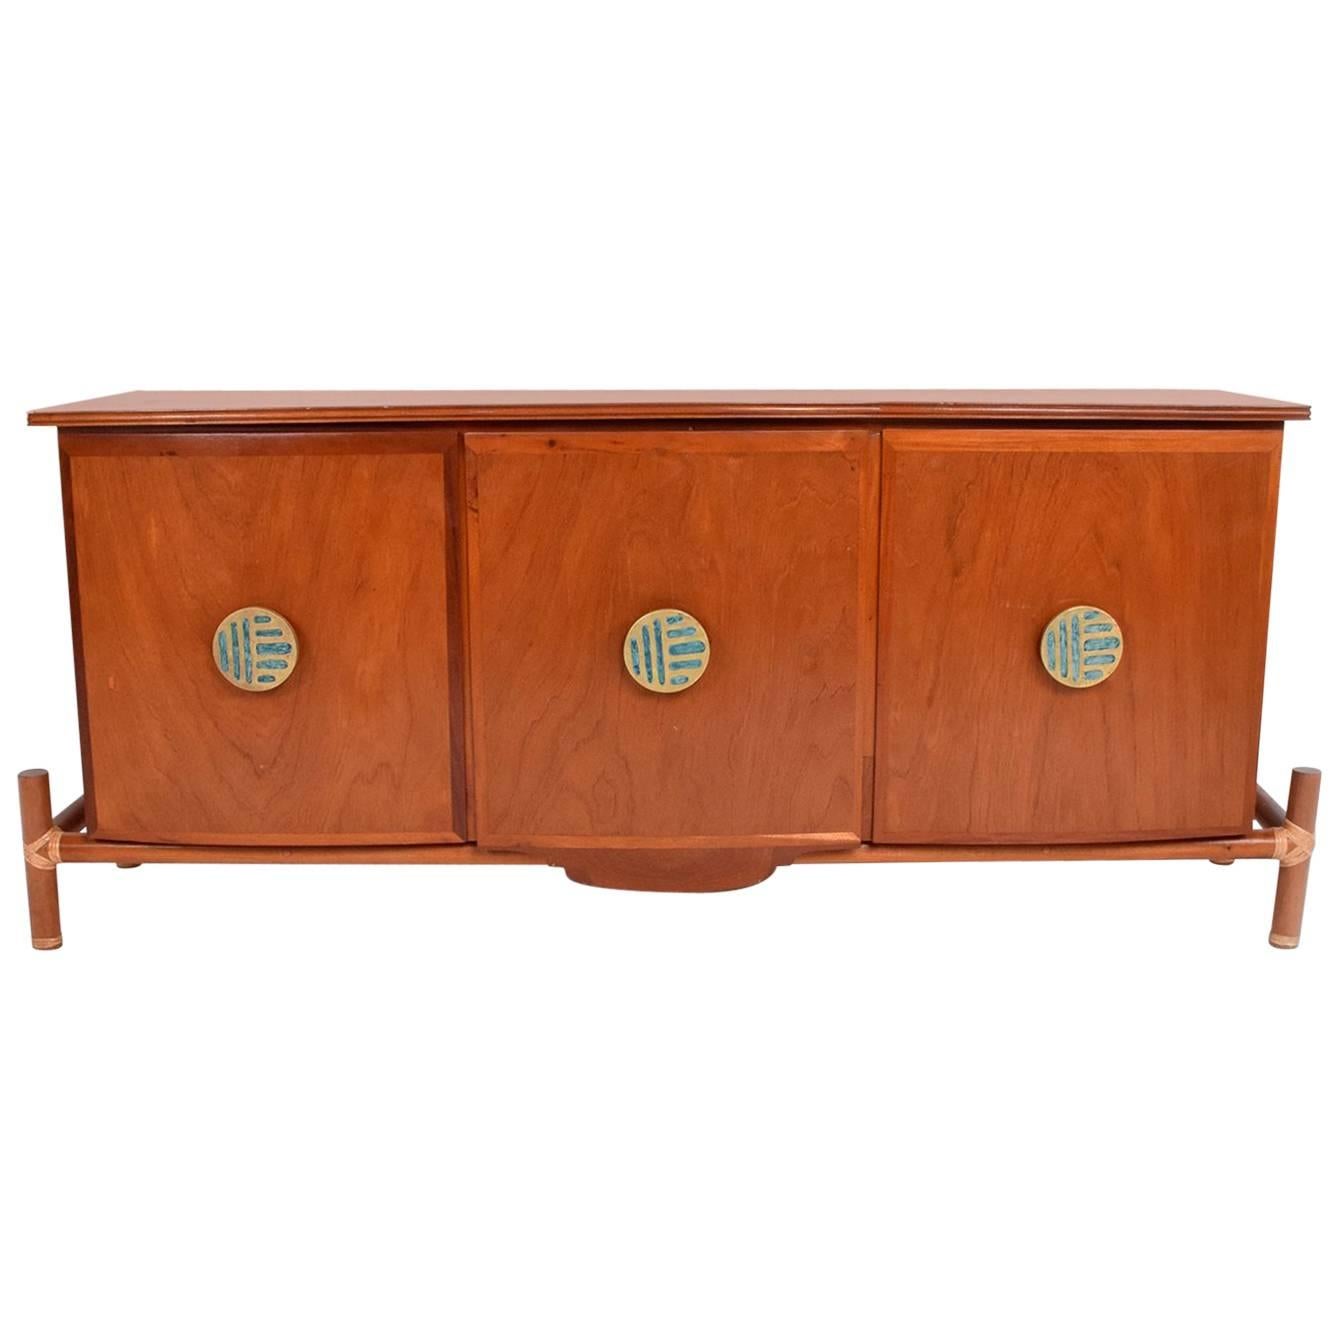 Mexican Modernist Credenza with Pepe Mendoza Pulls, Frank Kyle